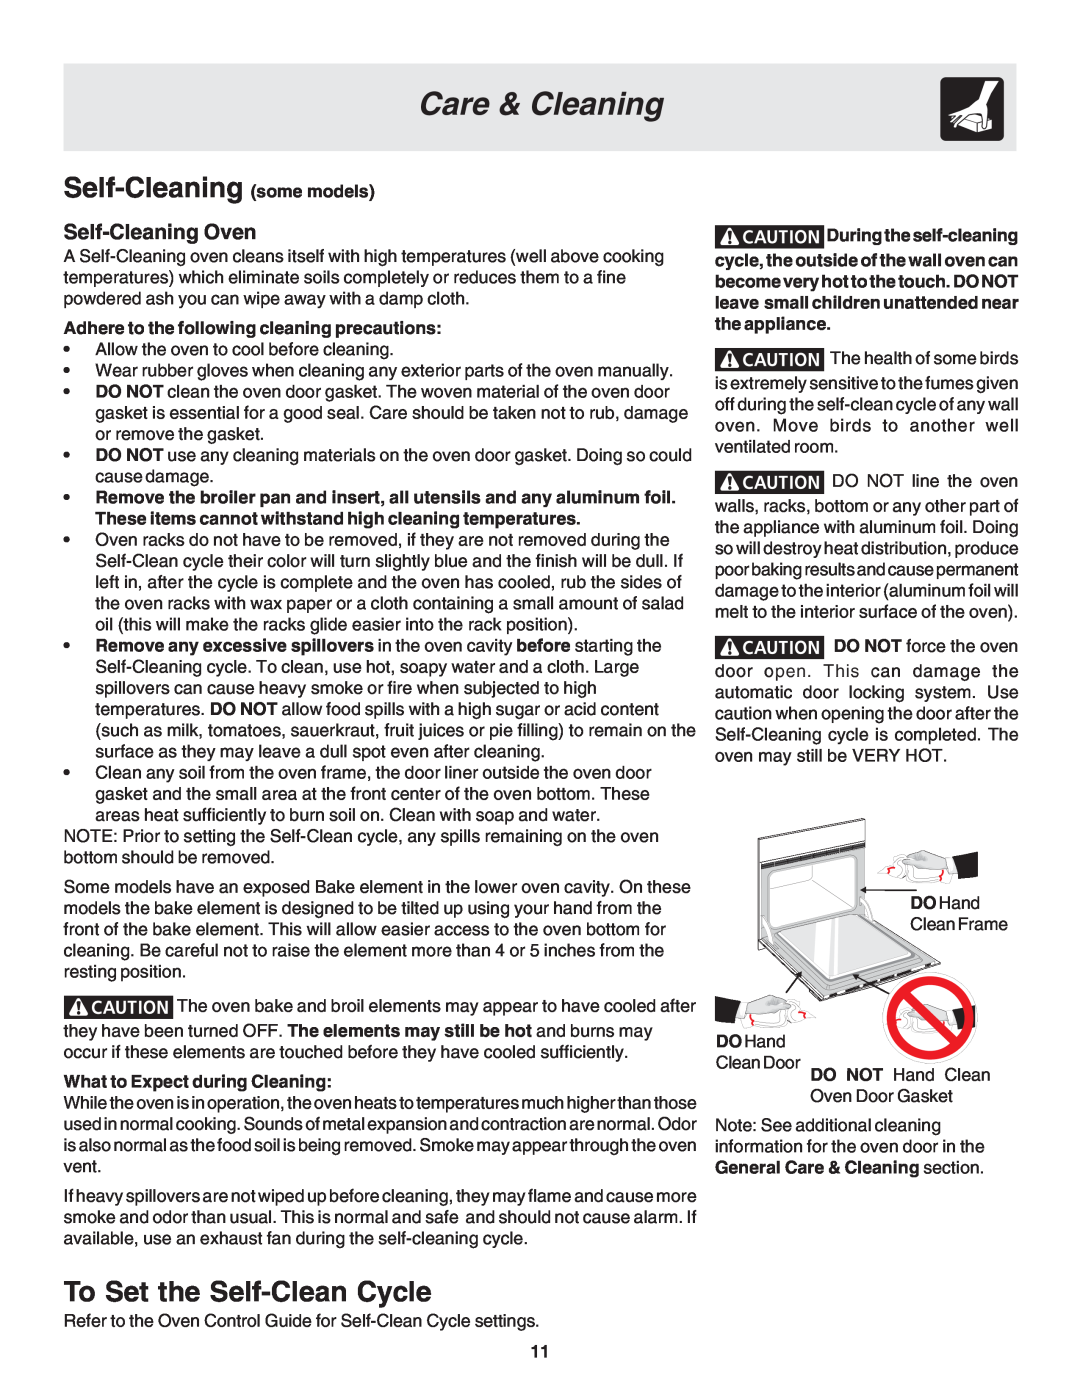 Frigidaire 318200944 manual Self-Cleaning some models, To Set the Self-Clean Cycle, Self-Cleaning Oven, Care & Cleaning 